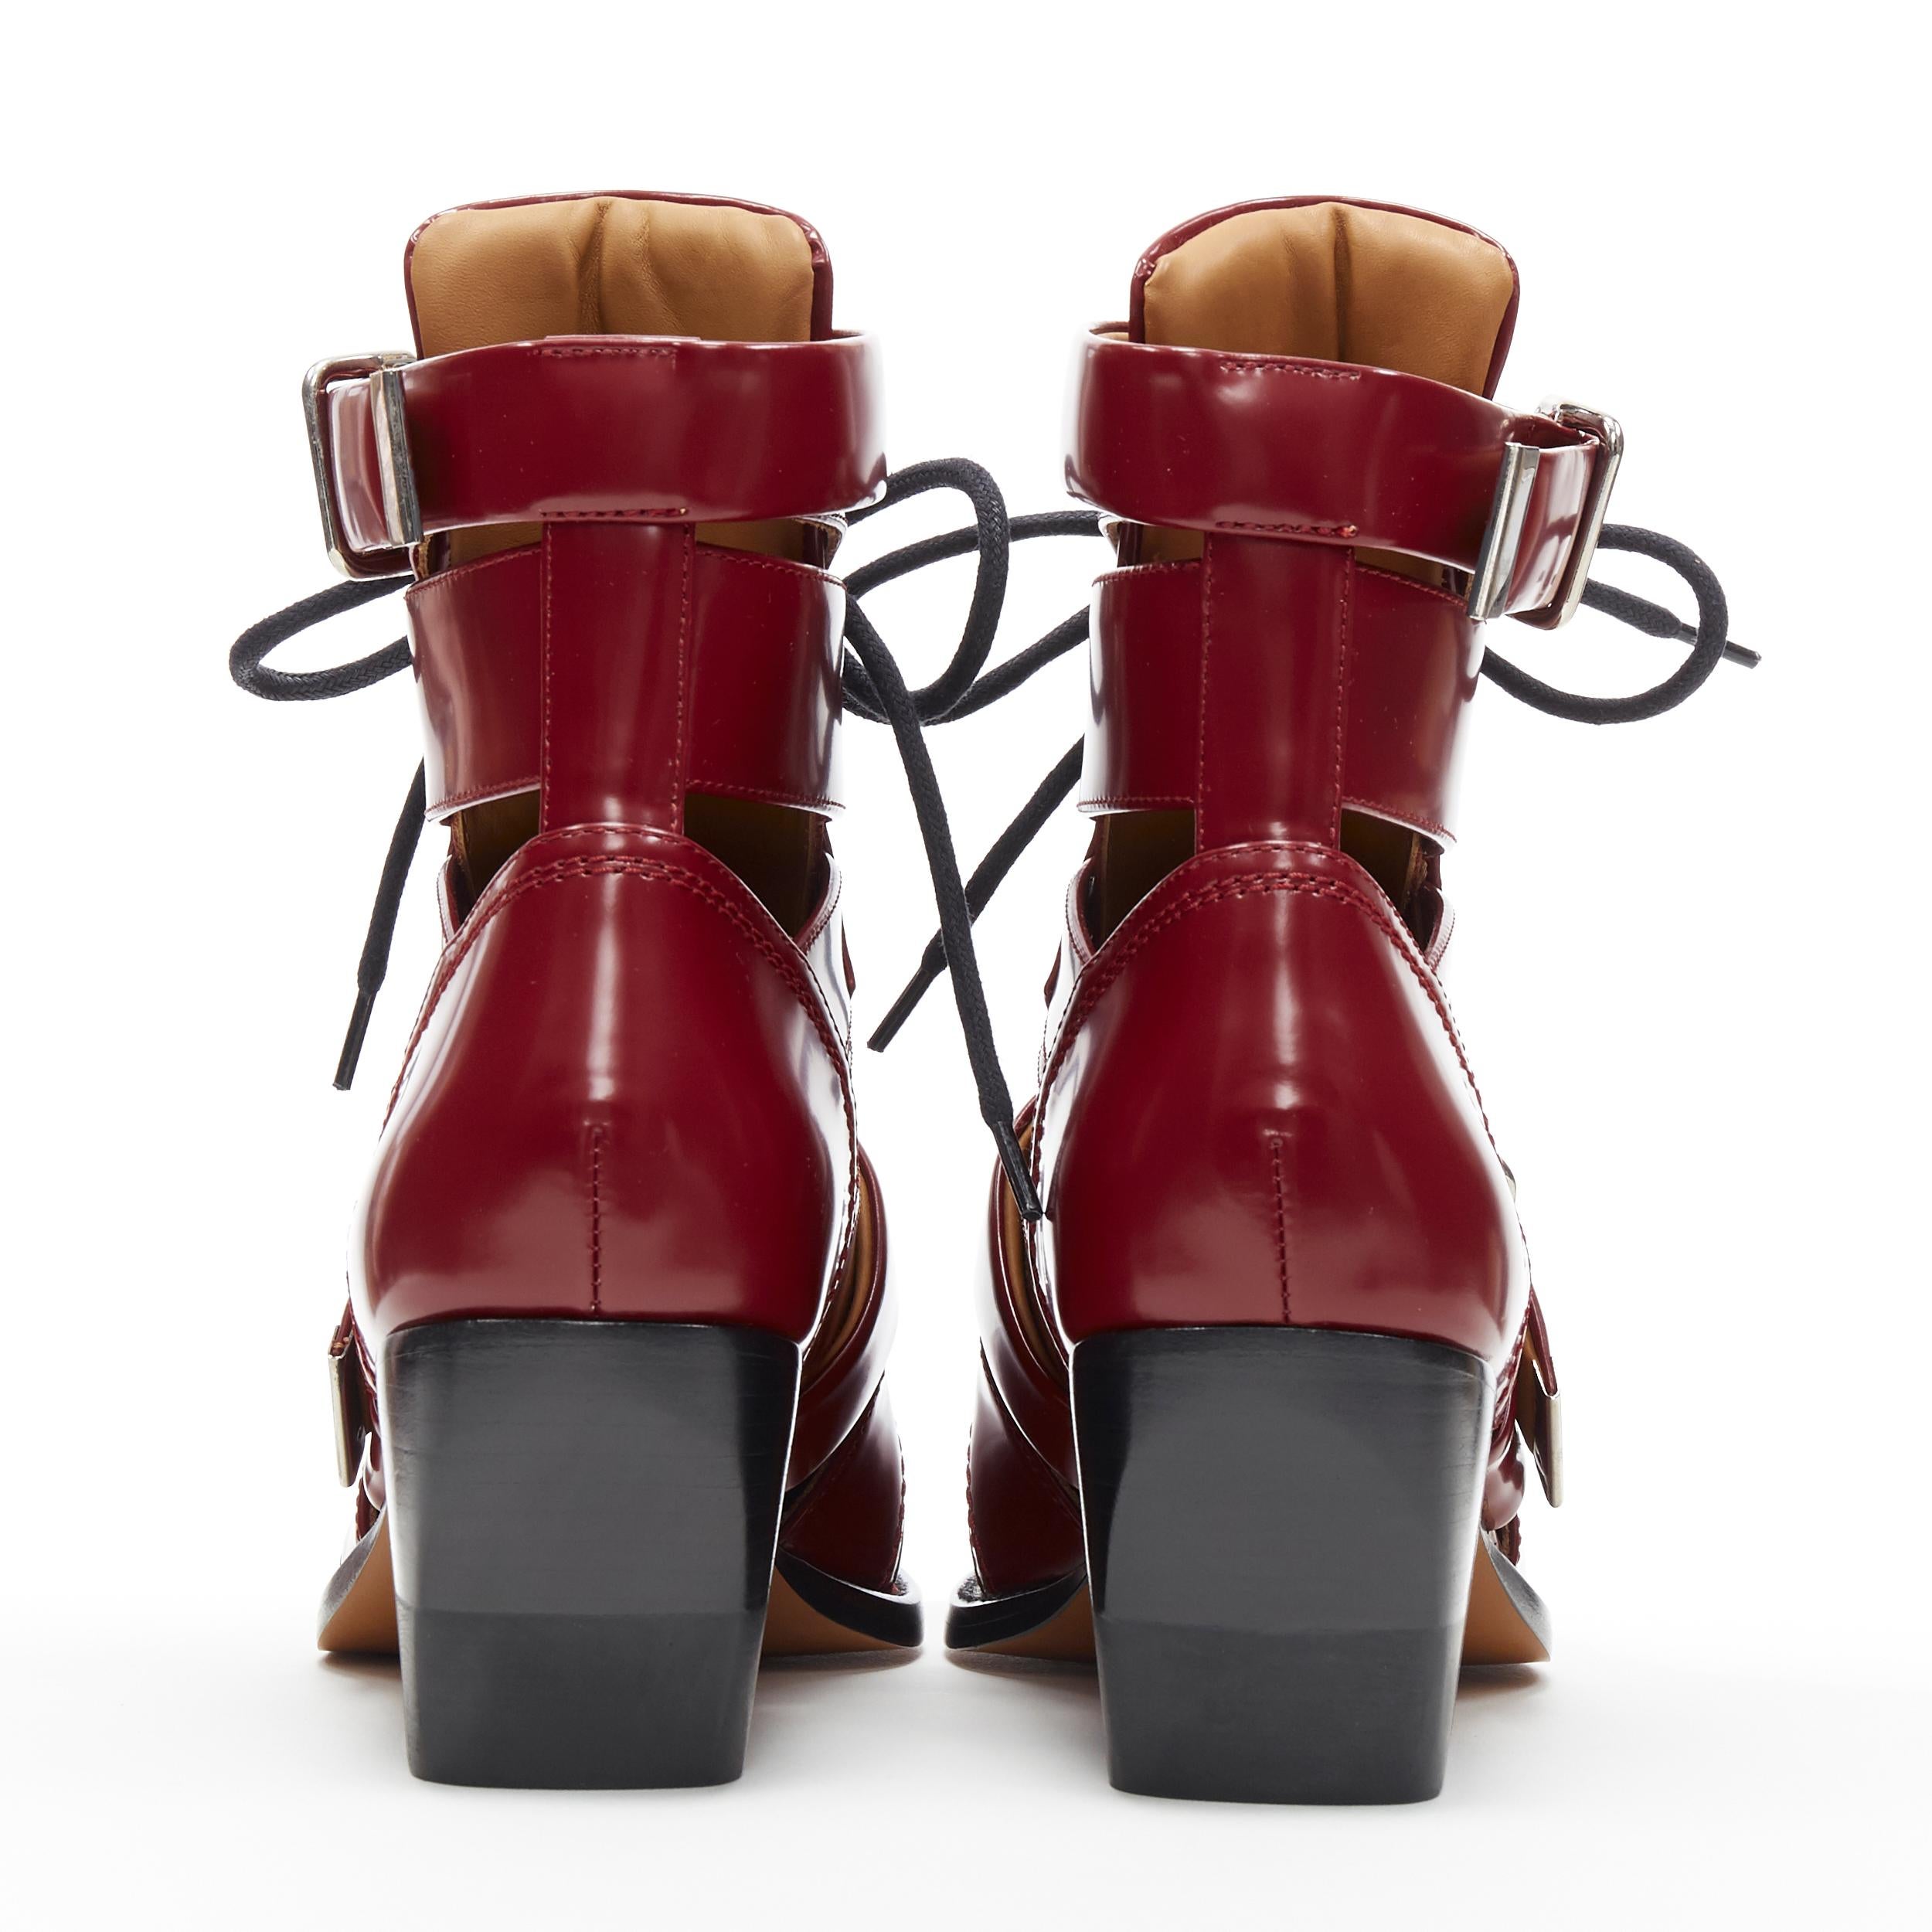 Women's new CHLOE Rylee burgundy red leather cut out buckled pointy ankle boot EU39.5